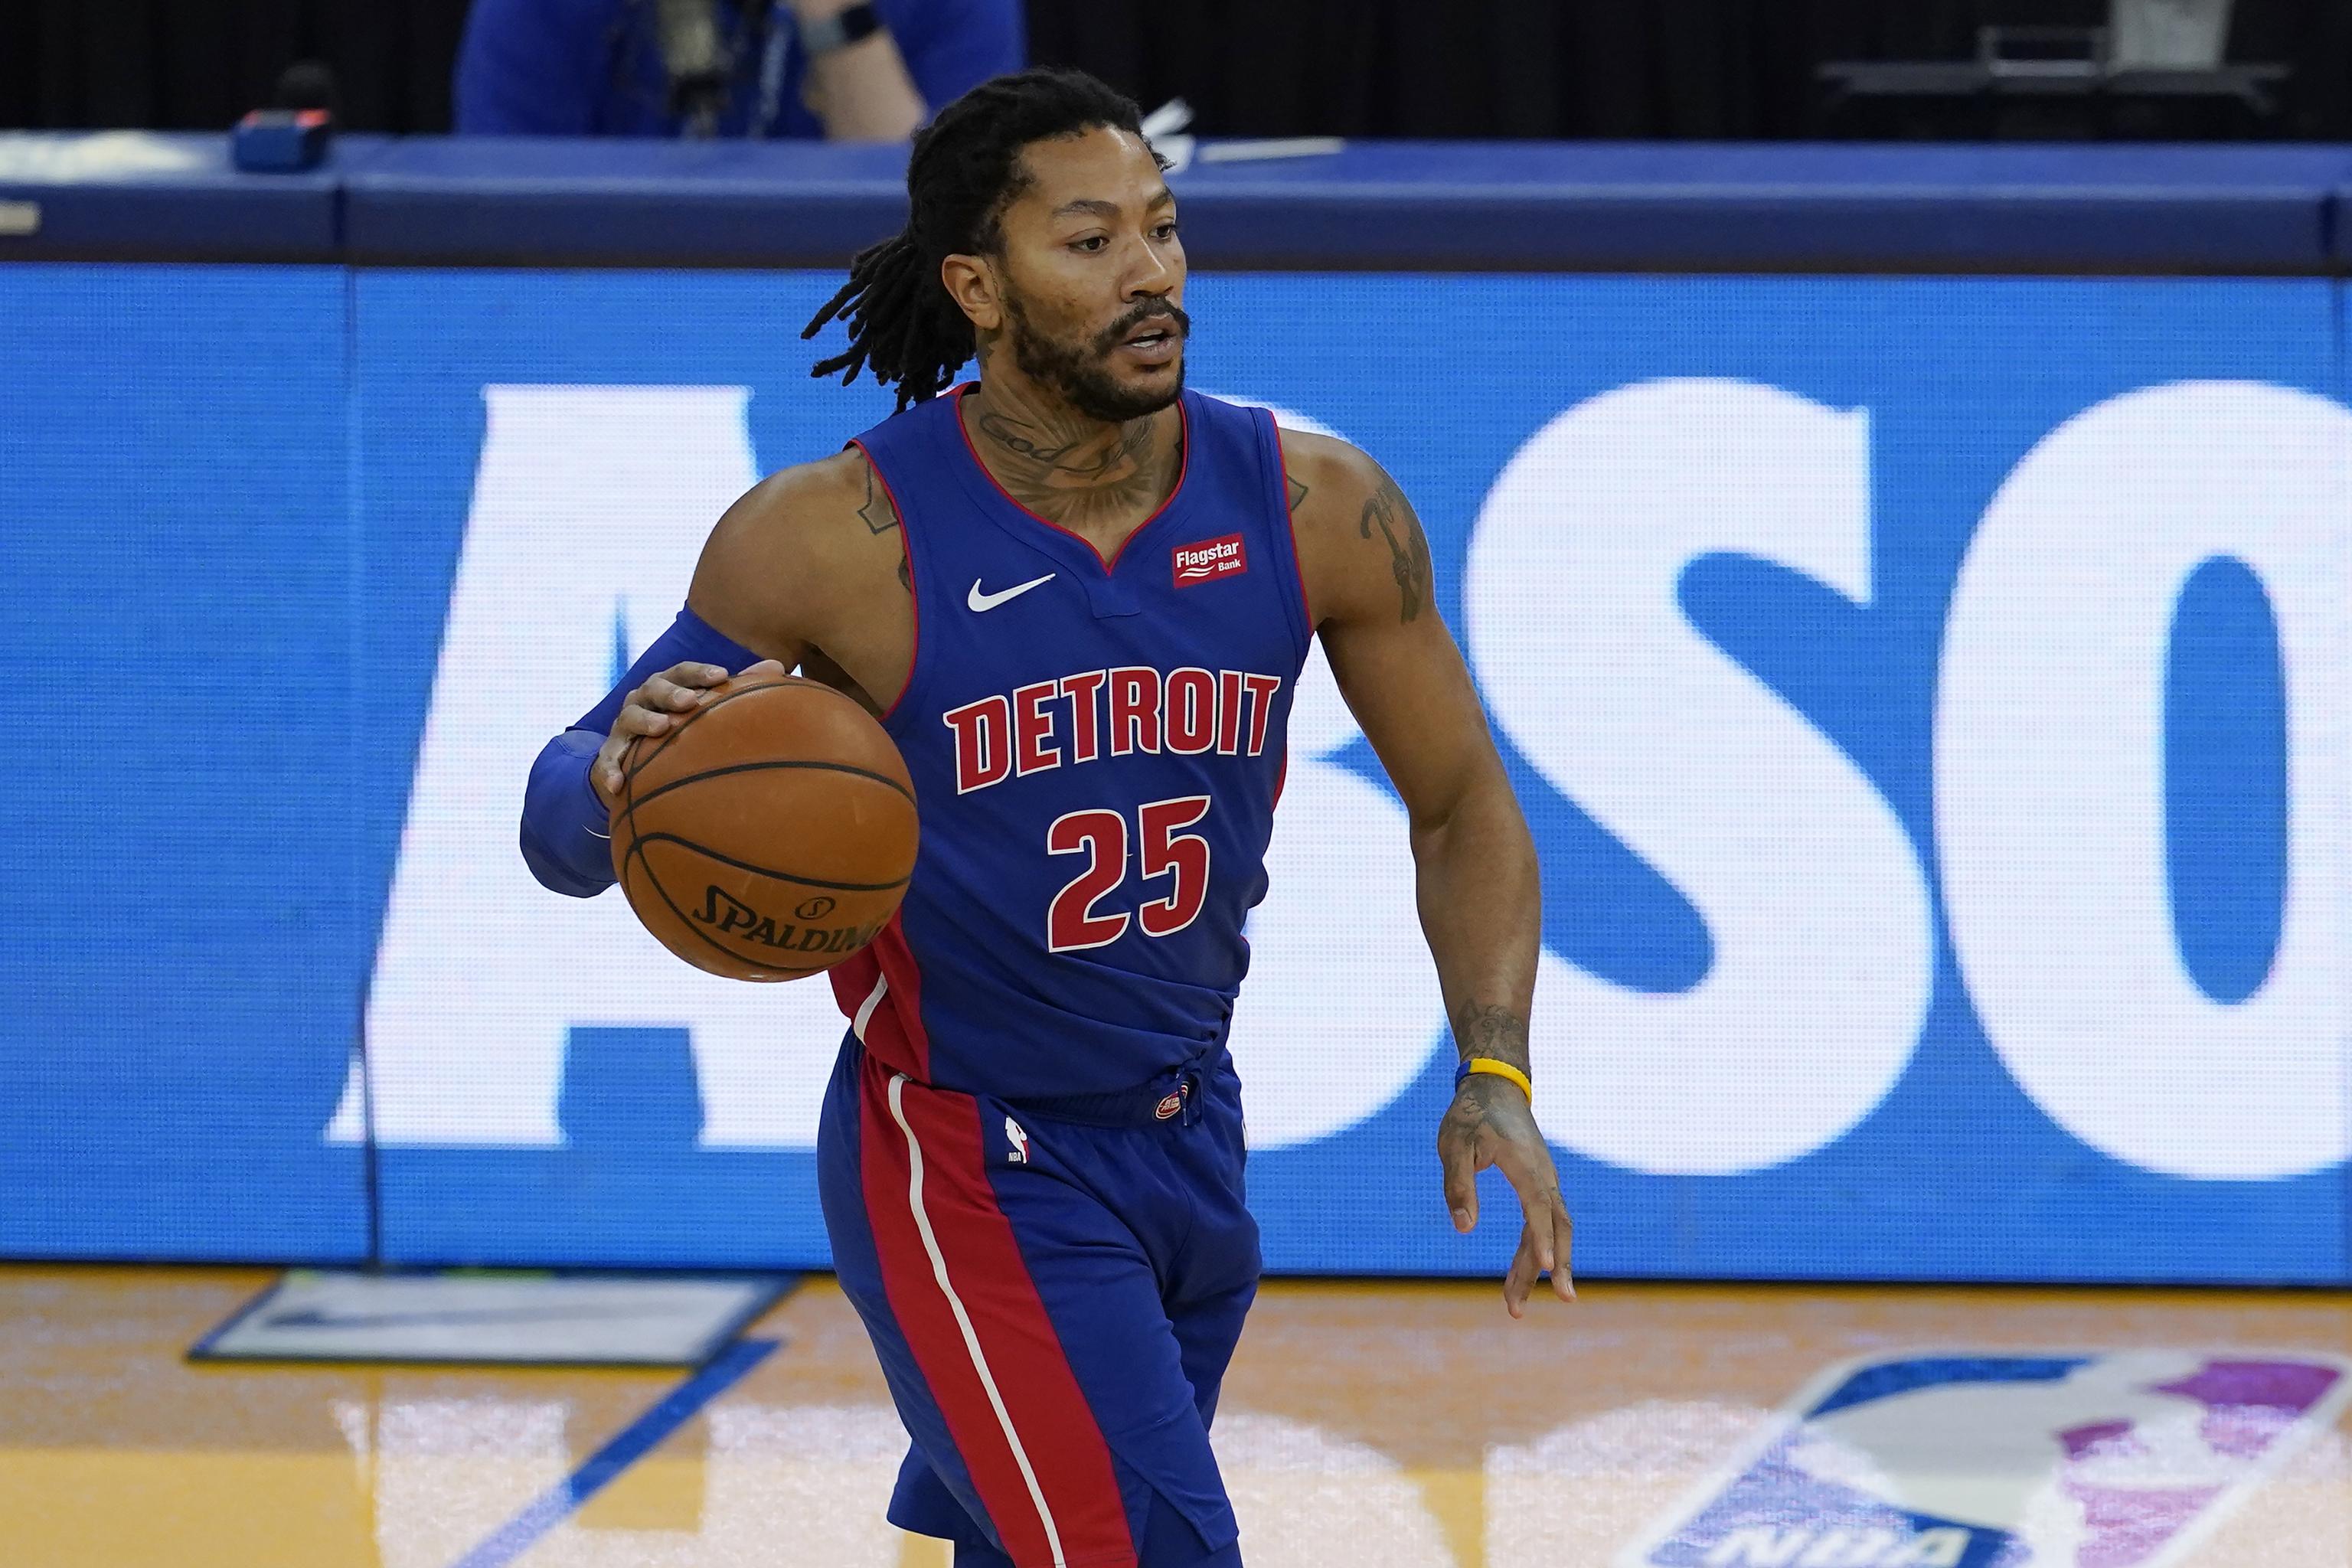 Derrick Rose will wear No. 25 with Knicks in honor of Ben 'Benji' Wilson,  Chicago HS hoops star who was shot to death – New York Daily News